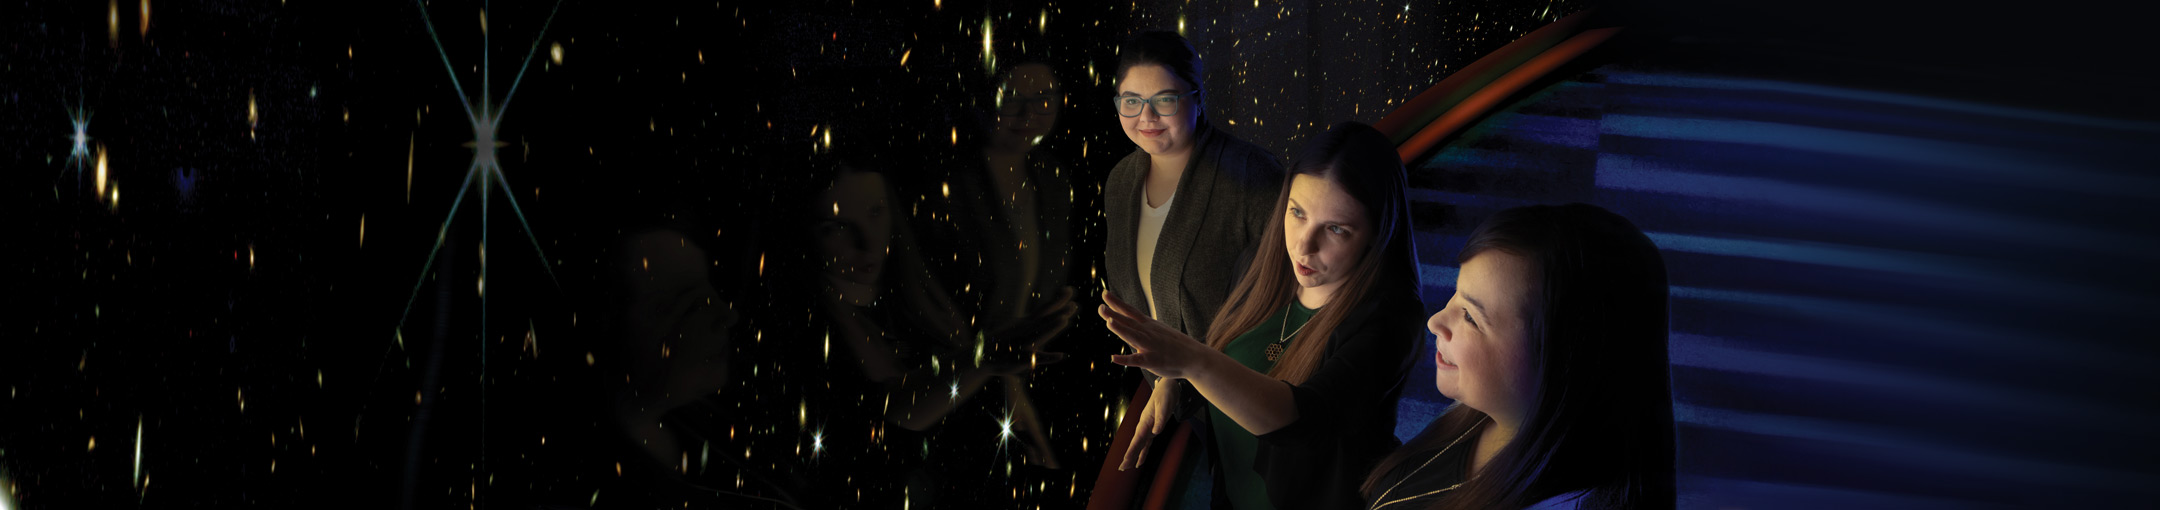 Three people look at a large projection wall of stars.